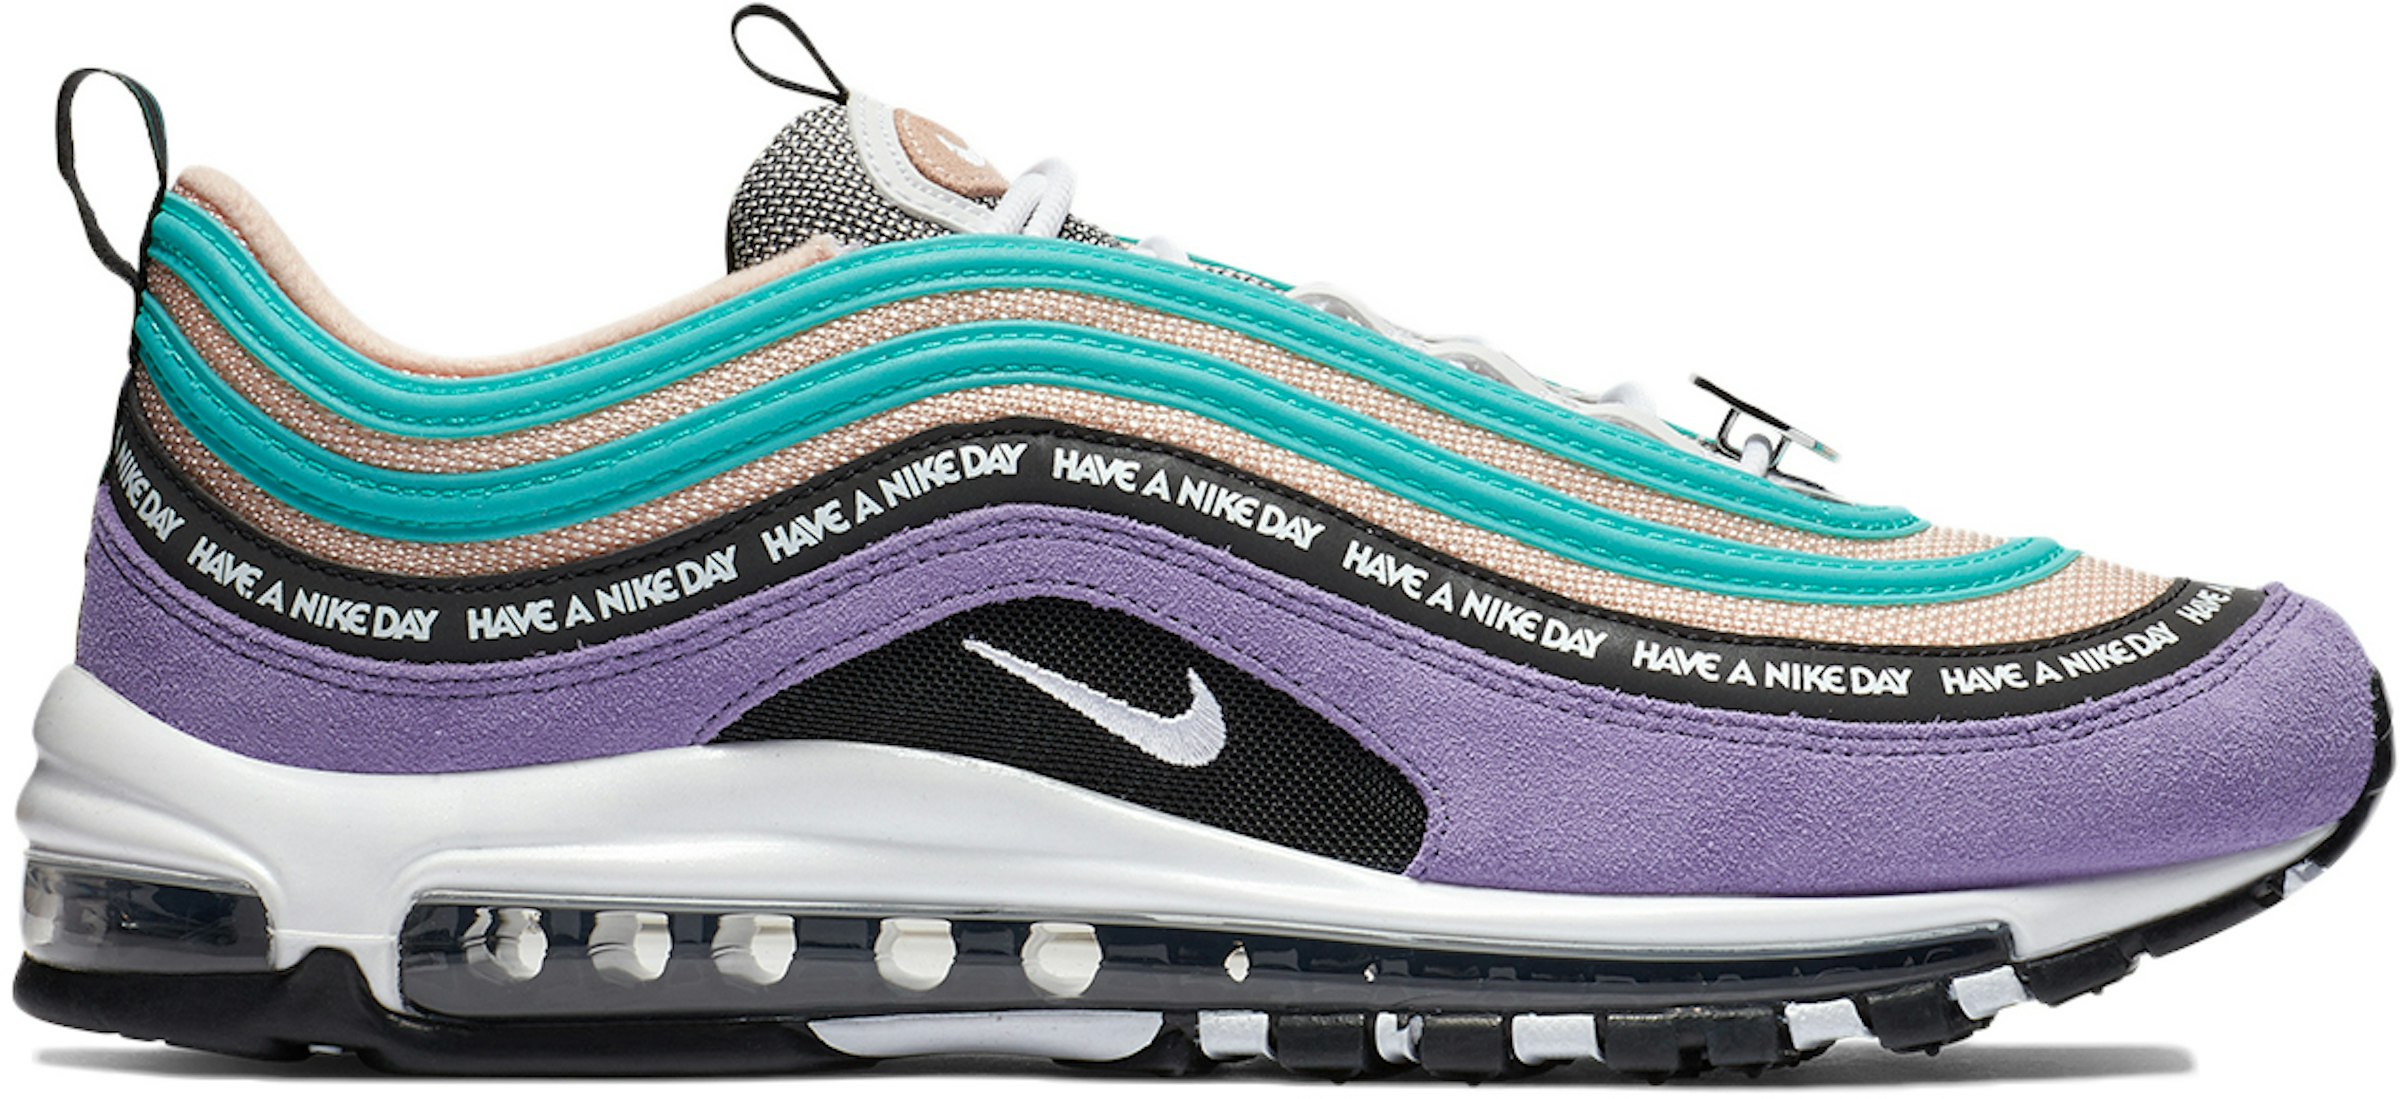 Nike Air Max 97 Have a Nike Day Men's BQ9130-500 - US